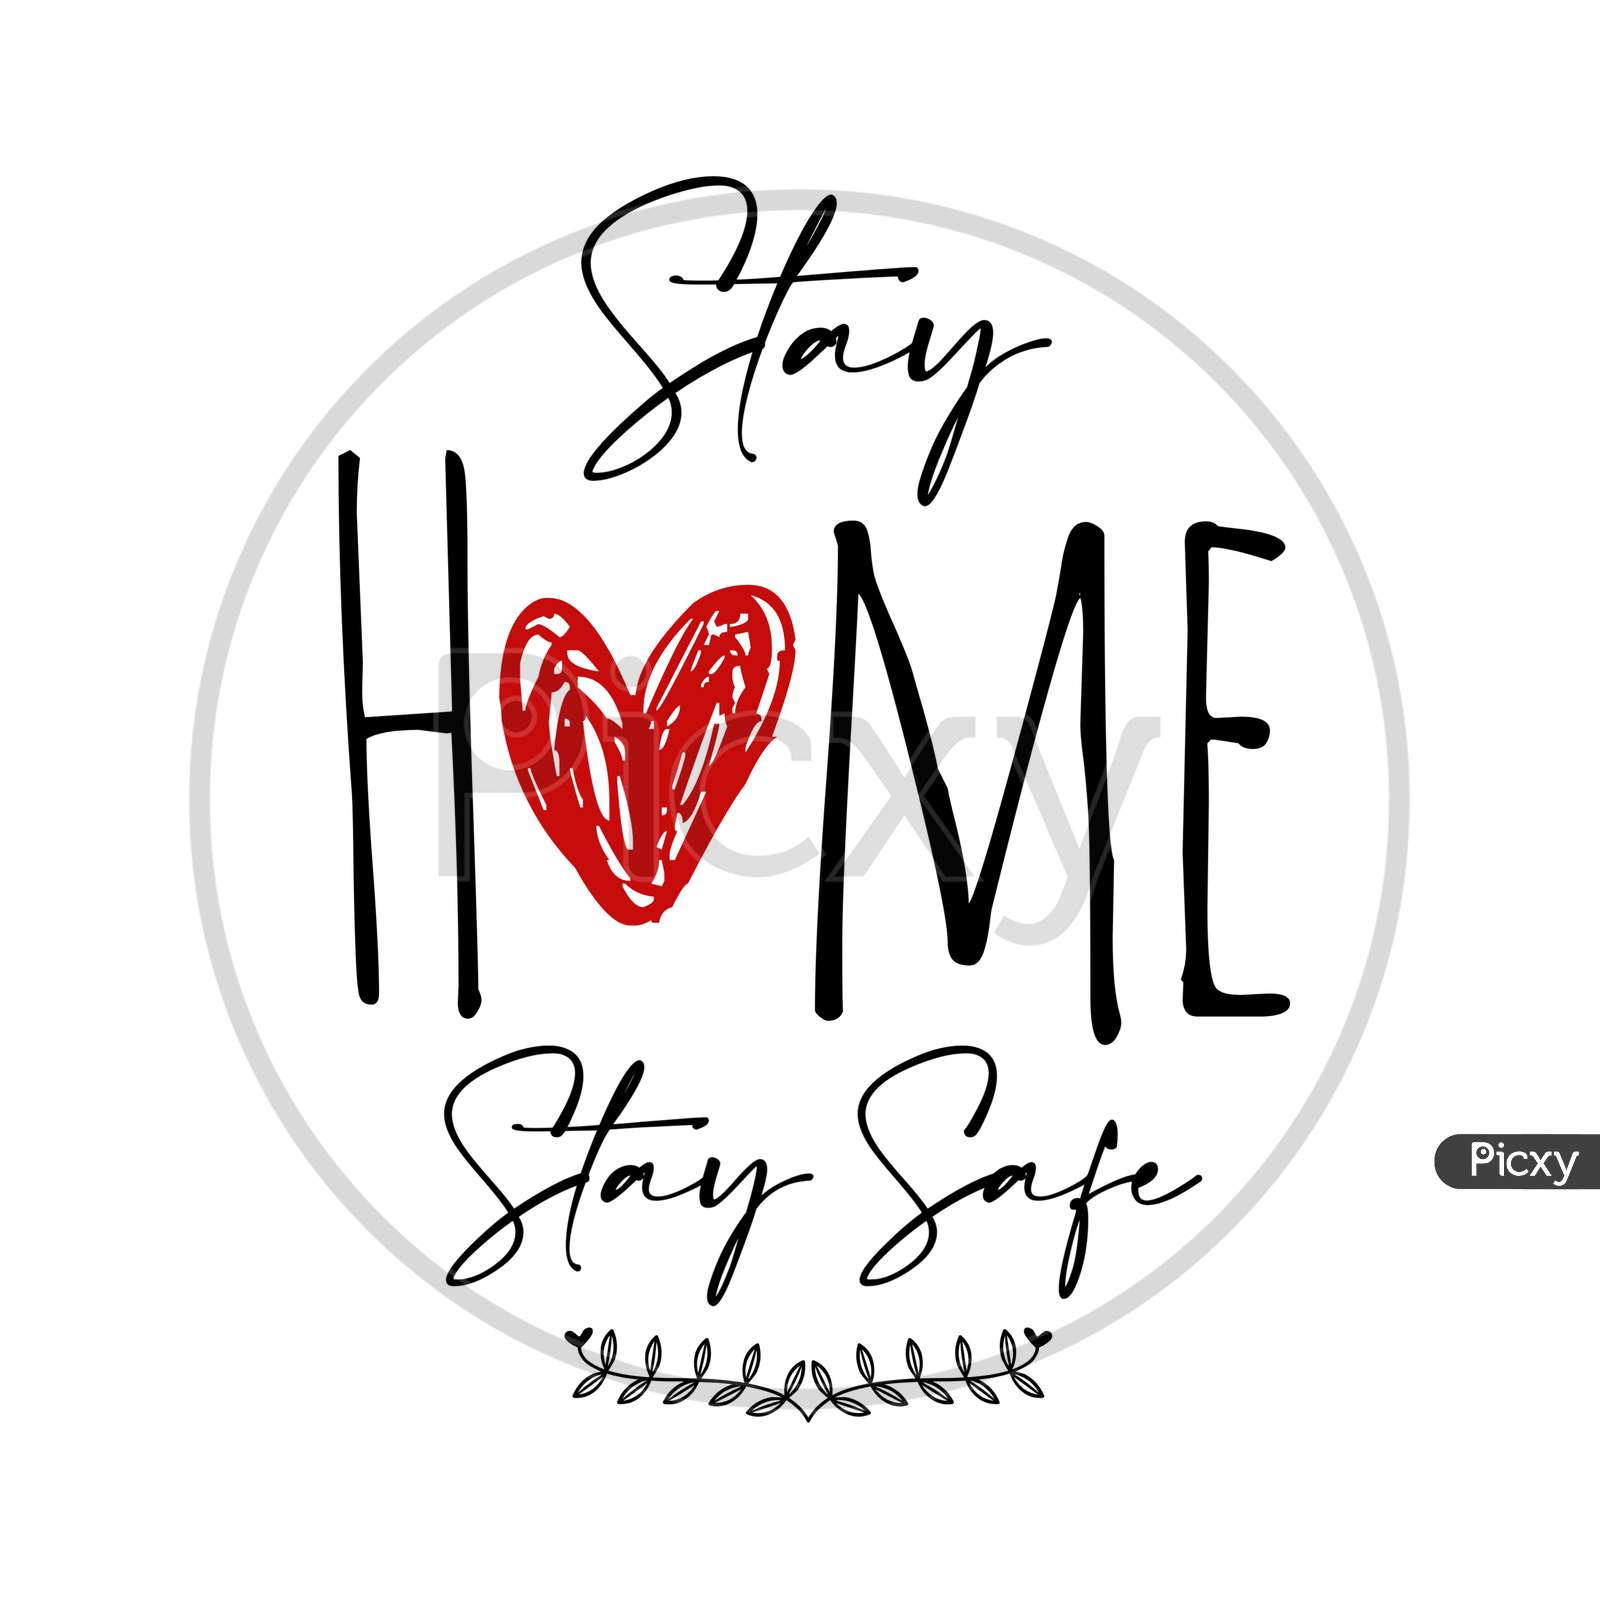 Stay Home Stay Safe (white background with black color fonts)